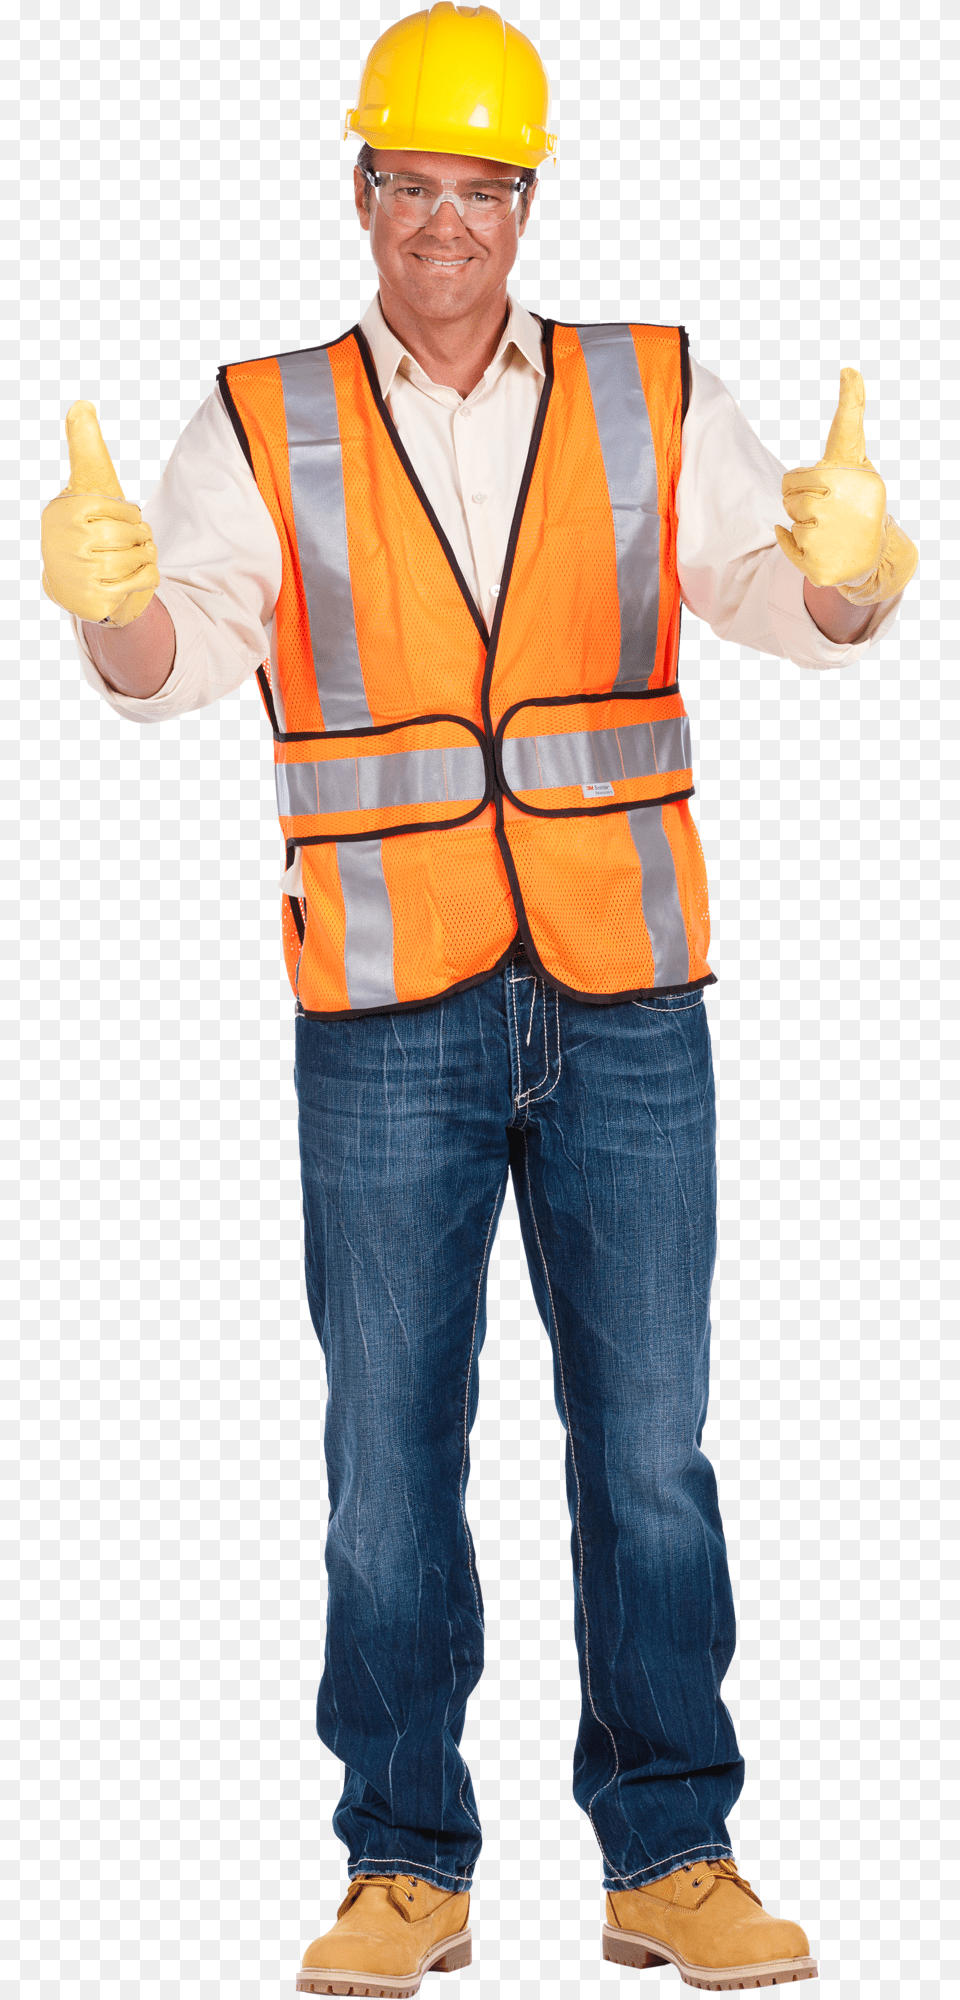 Work Health And Safety Enthusiasts Unite Lifejacket, Worker, Clothing, Vest, Hardhat Png Image